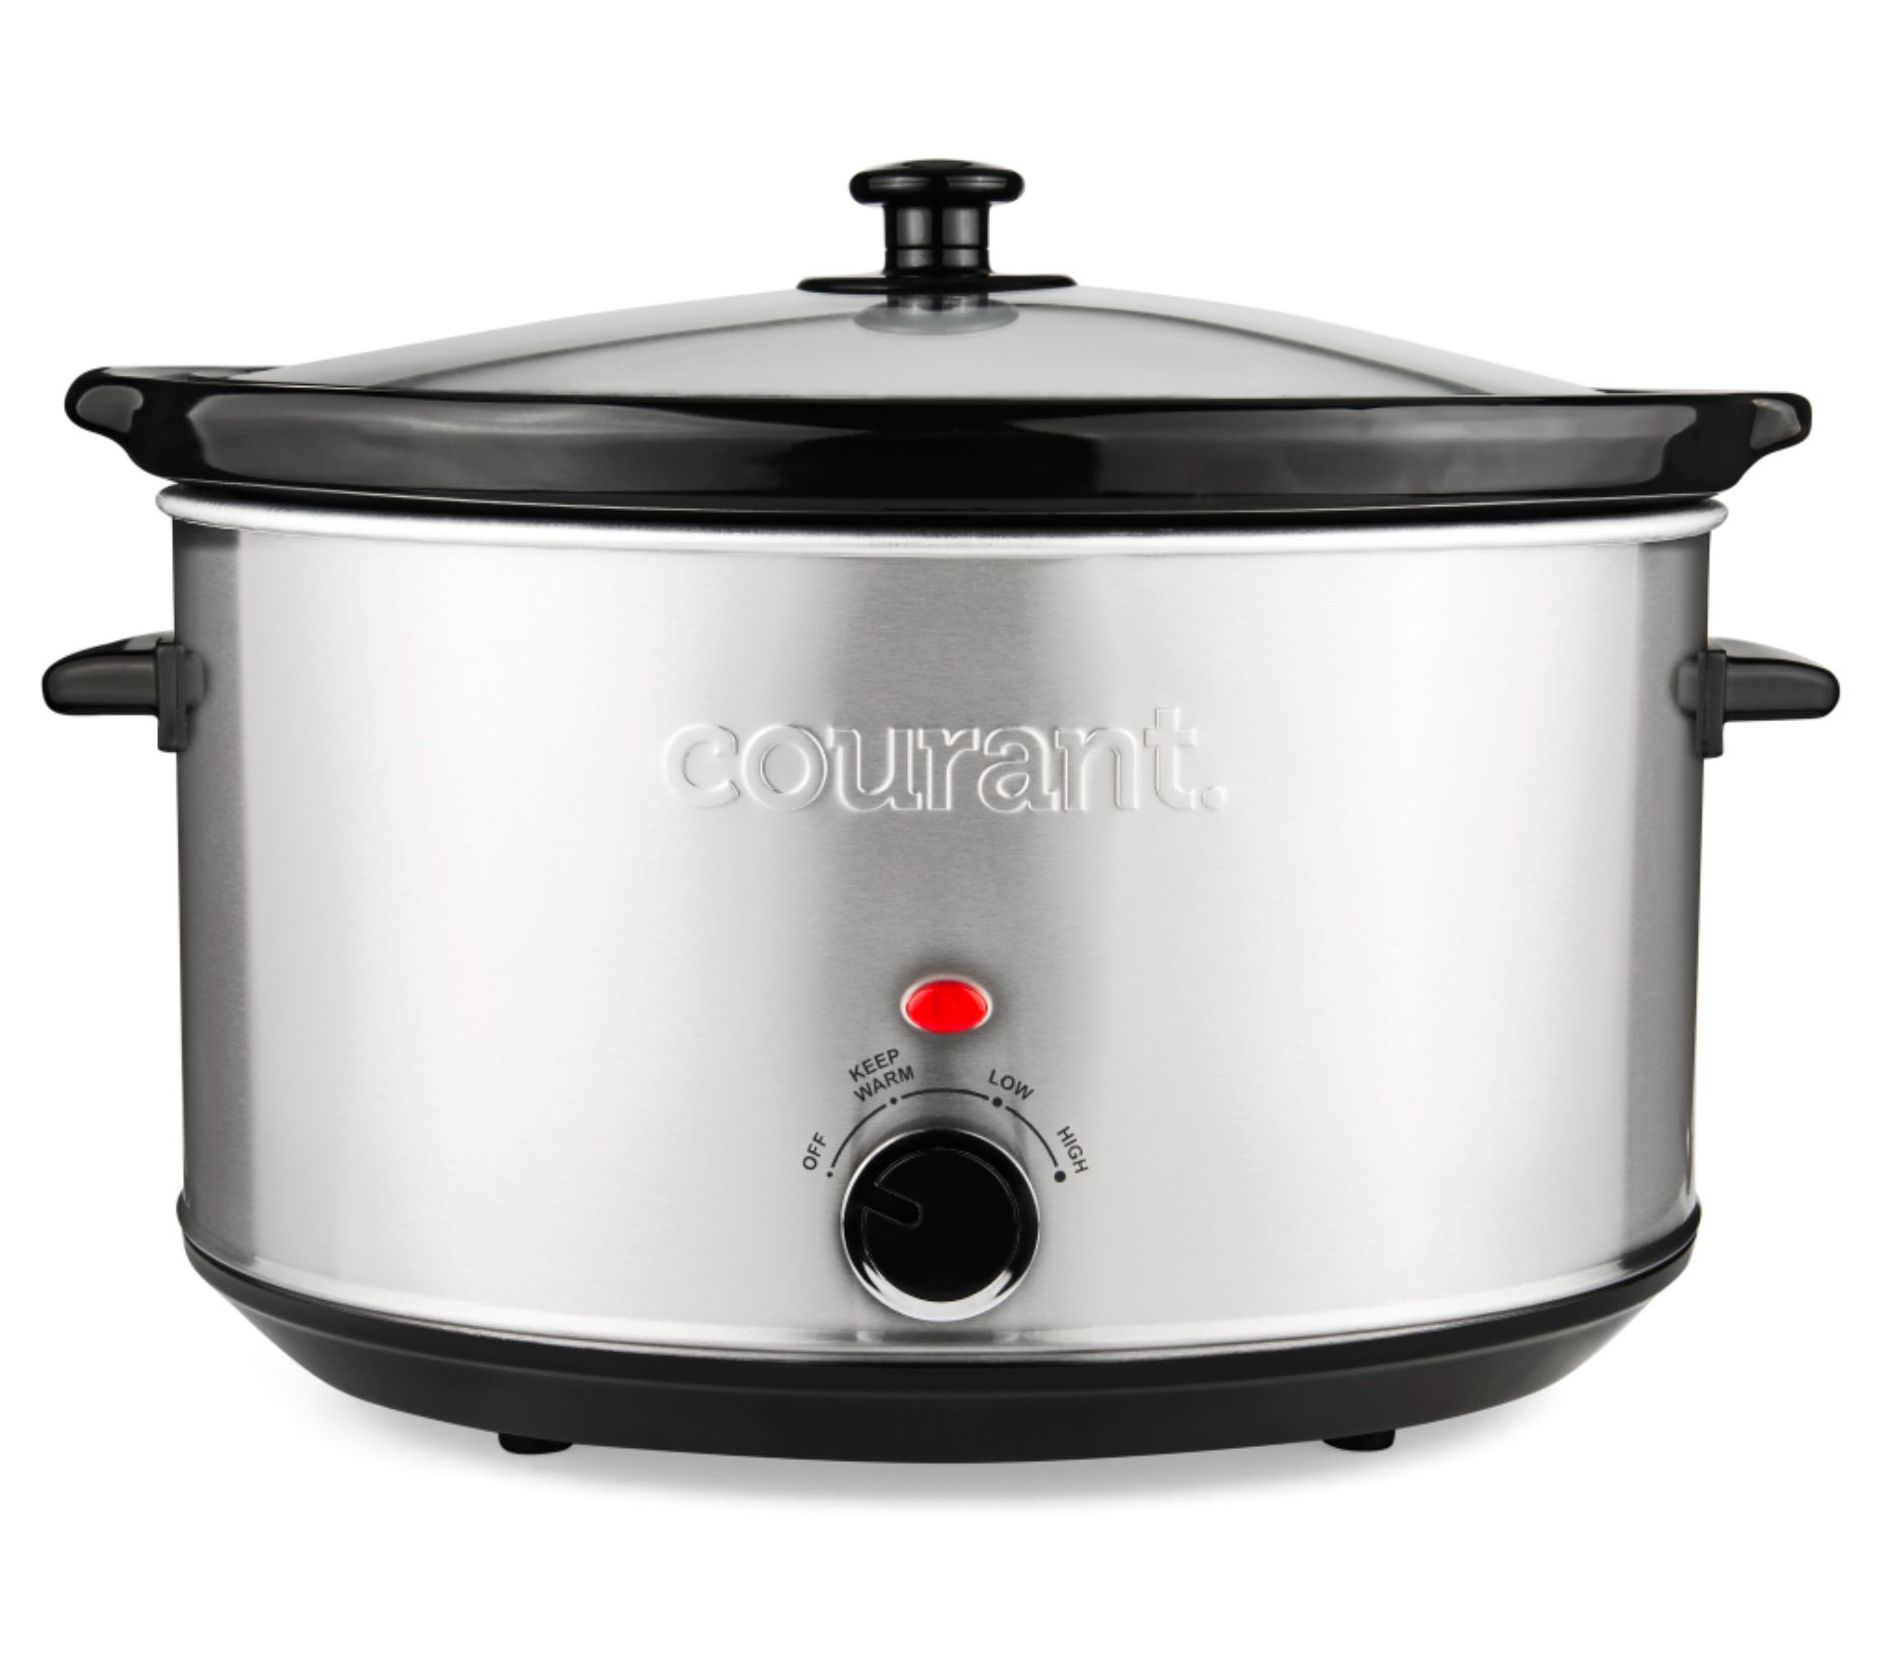  Crock-Pot Stainless Steel Trio Cook & Serve Slow Cooker & Food  Warmer: Home & Kitchen